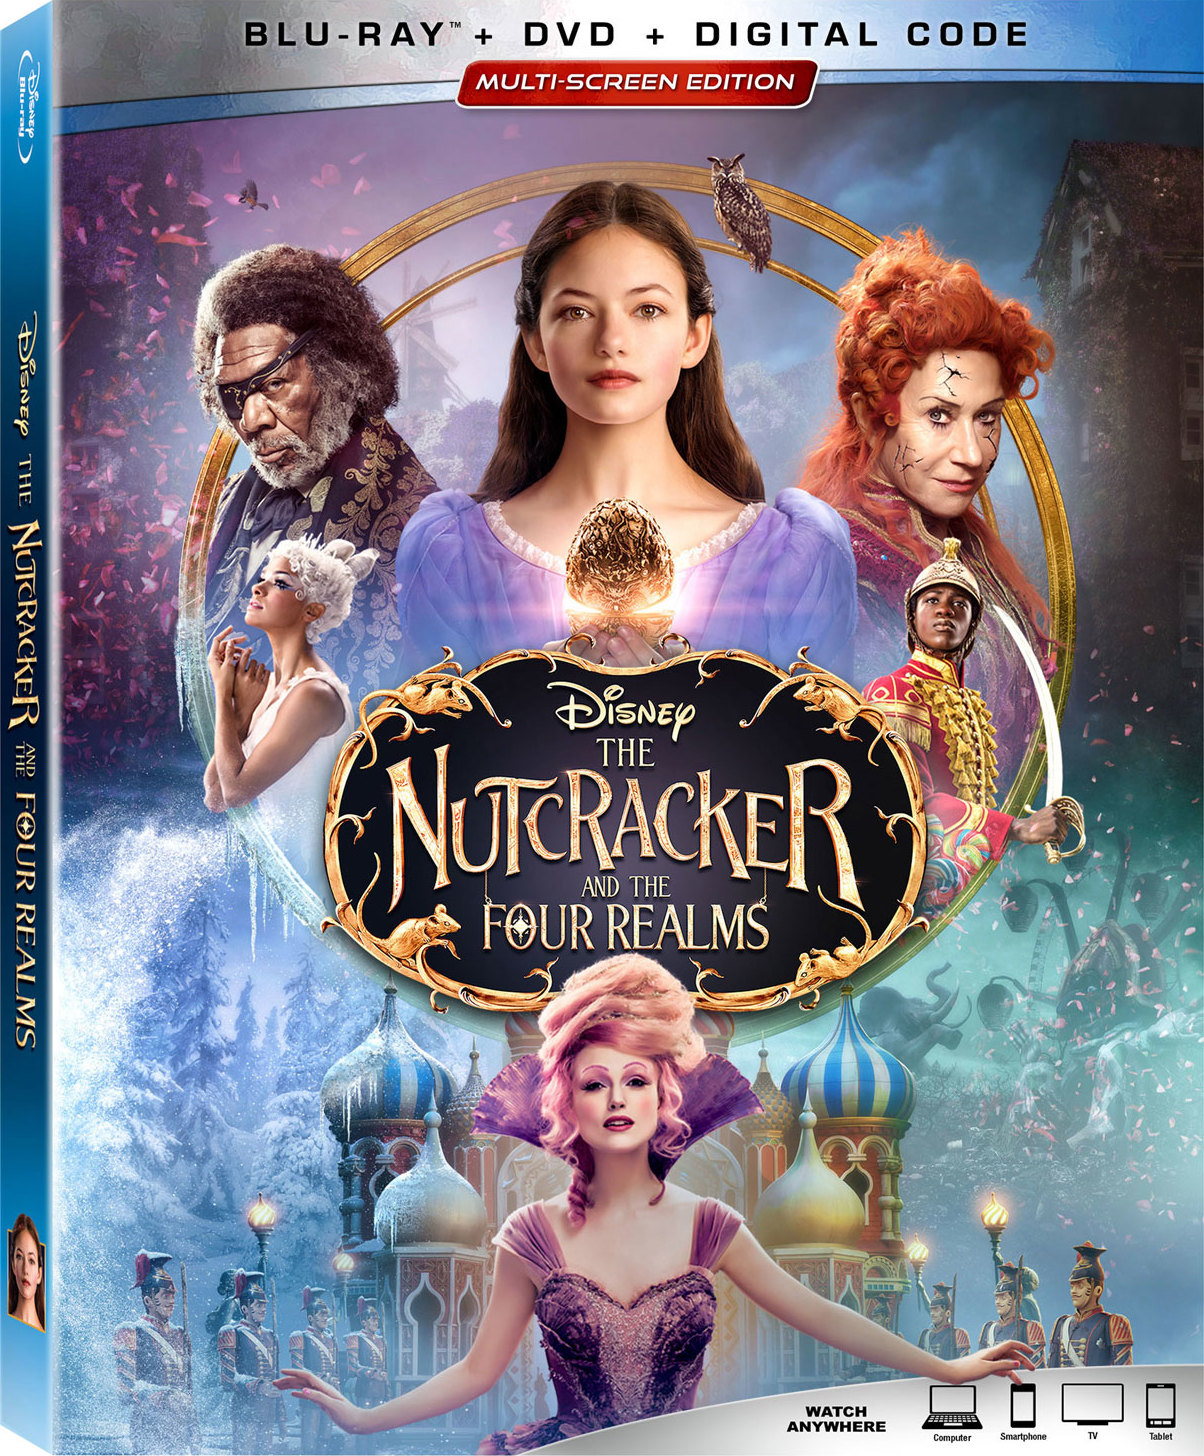 Disney’s The Nutcracker And The Four Realms On Blu-ray – Bonus Scenes And More